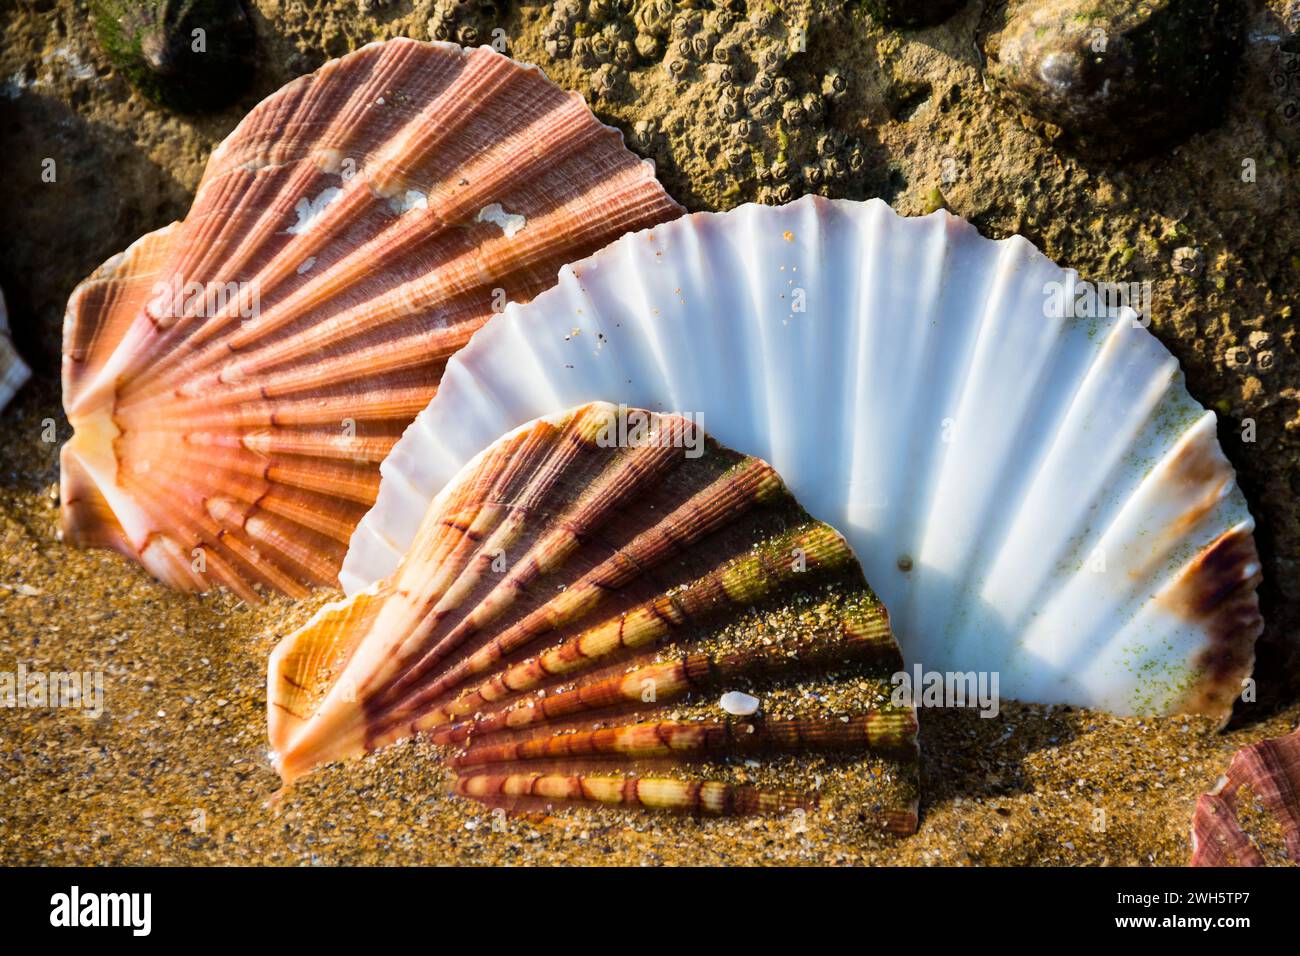 The tree seashells resting on a sandy beach surrounded by rocks and pebbles. Stock Photo